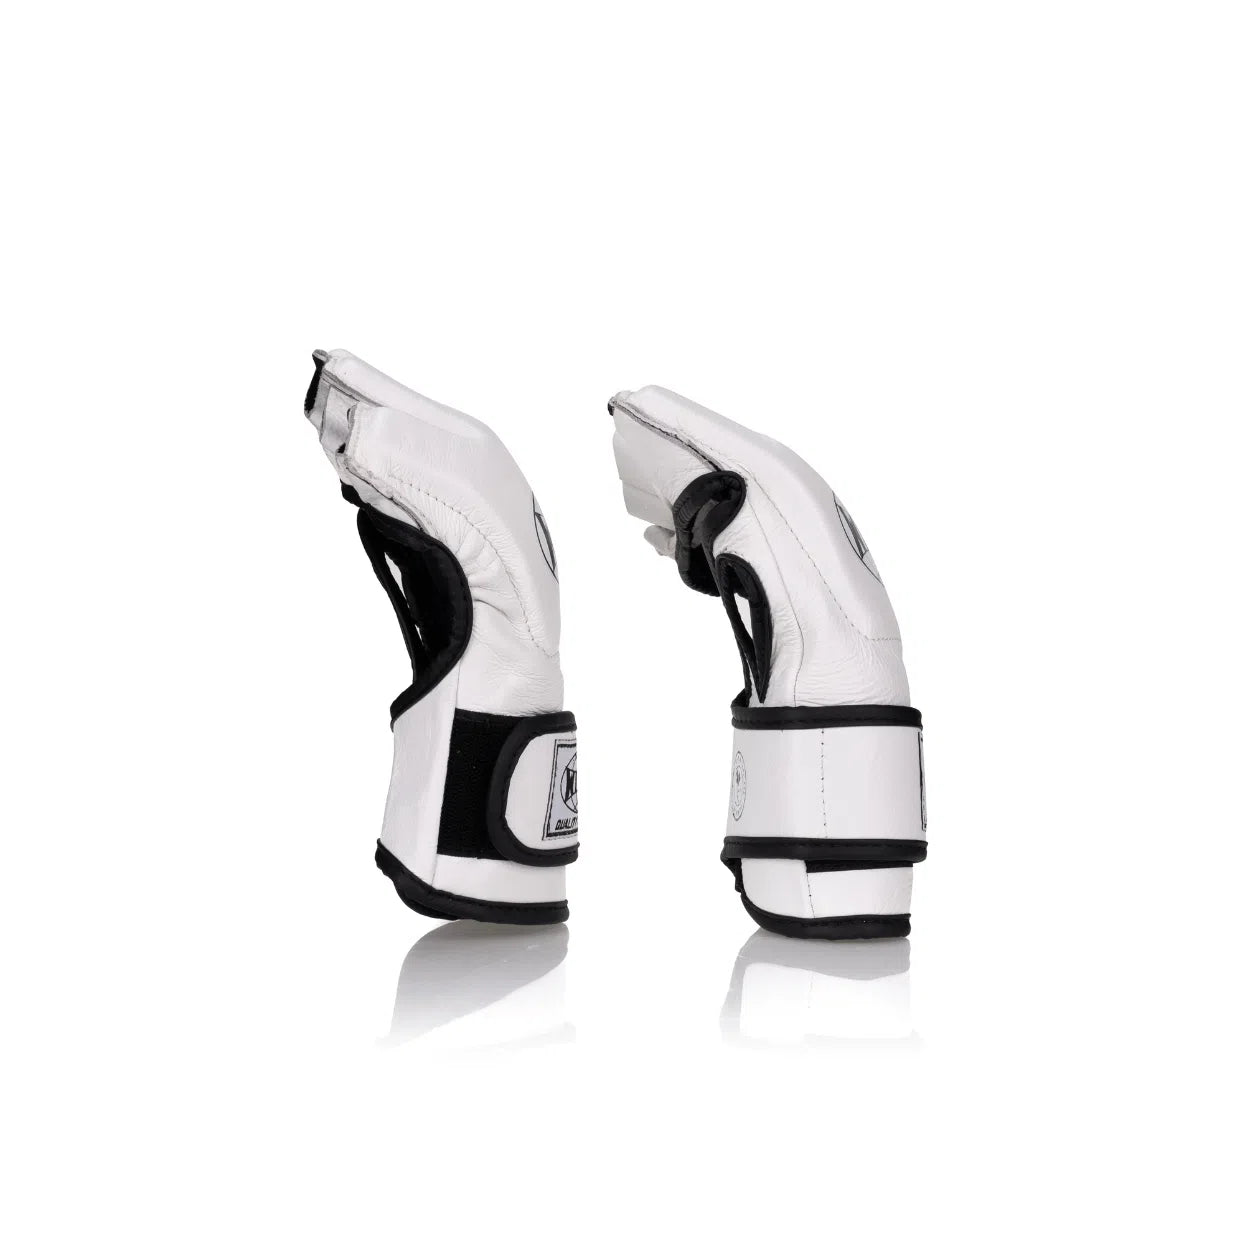 MMA Competition Fight Gloves - White